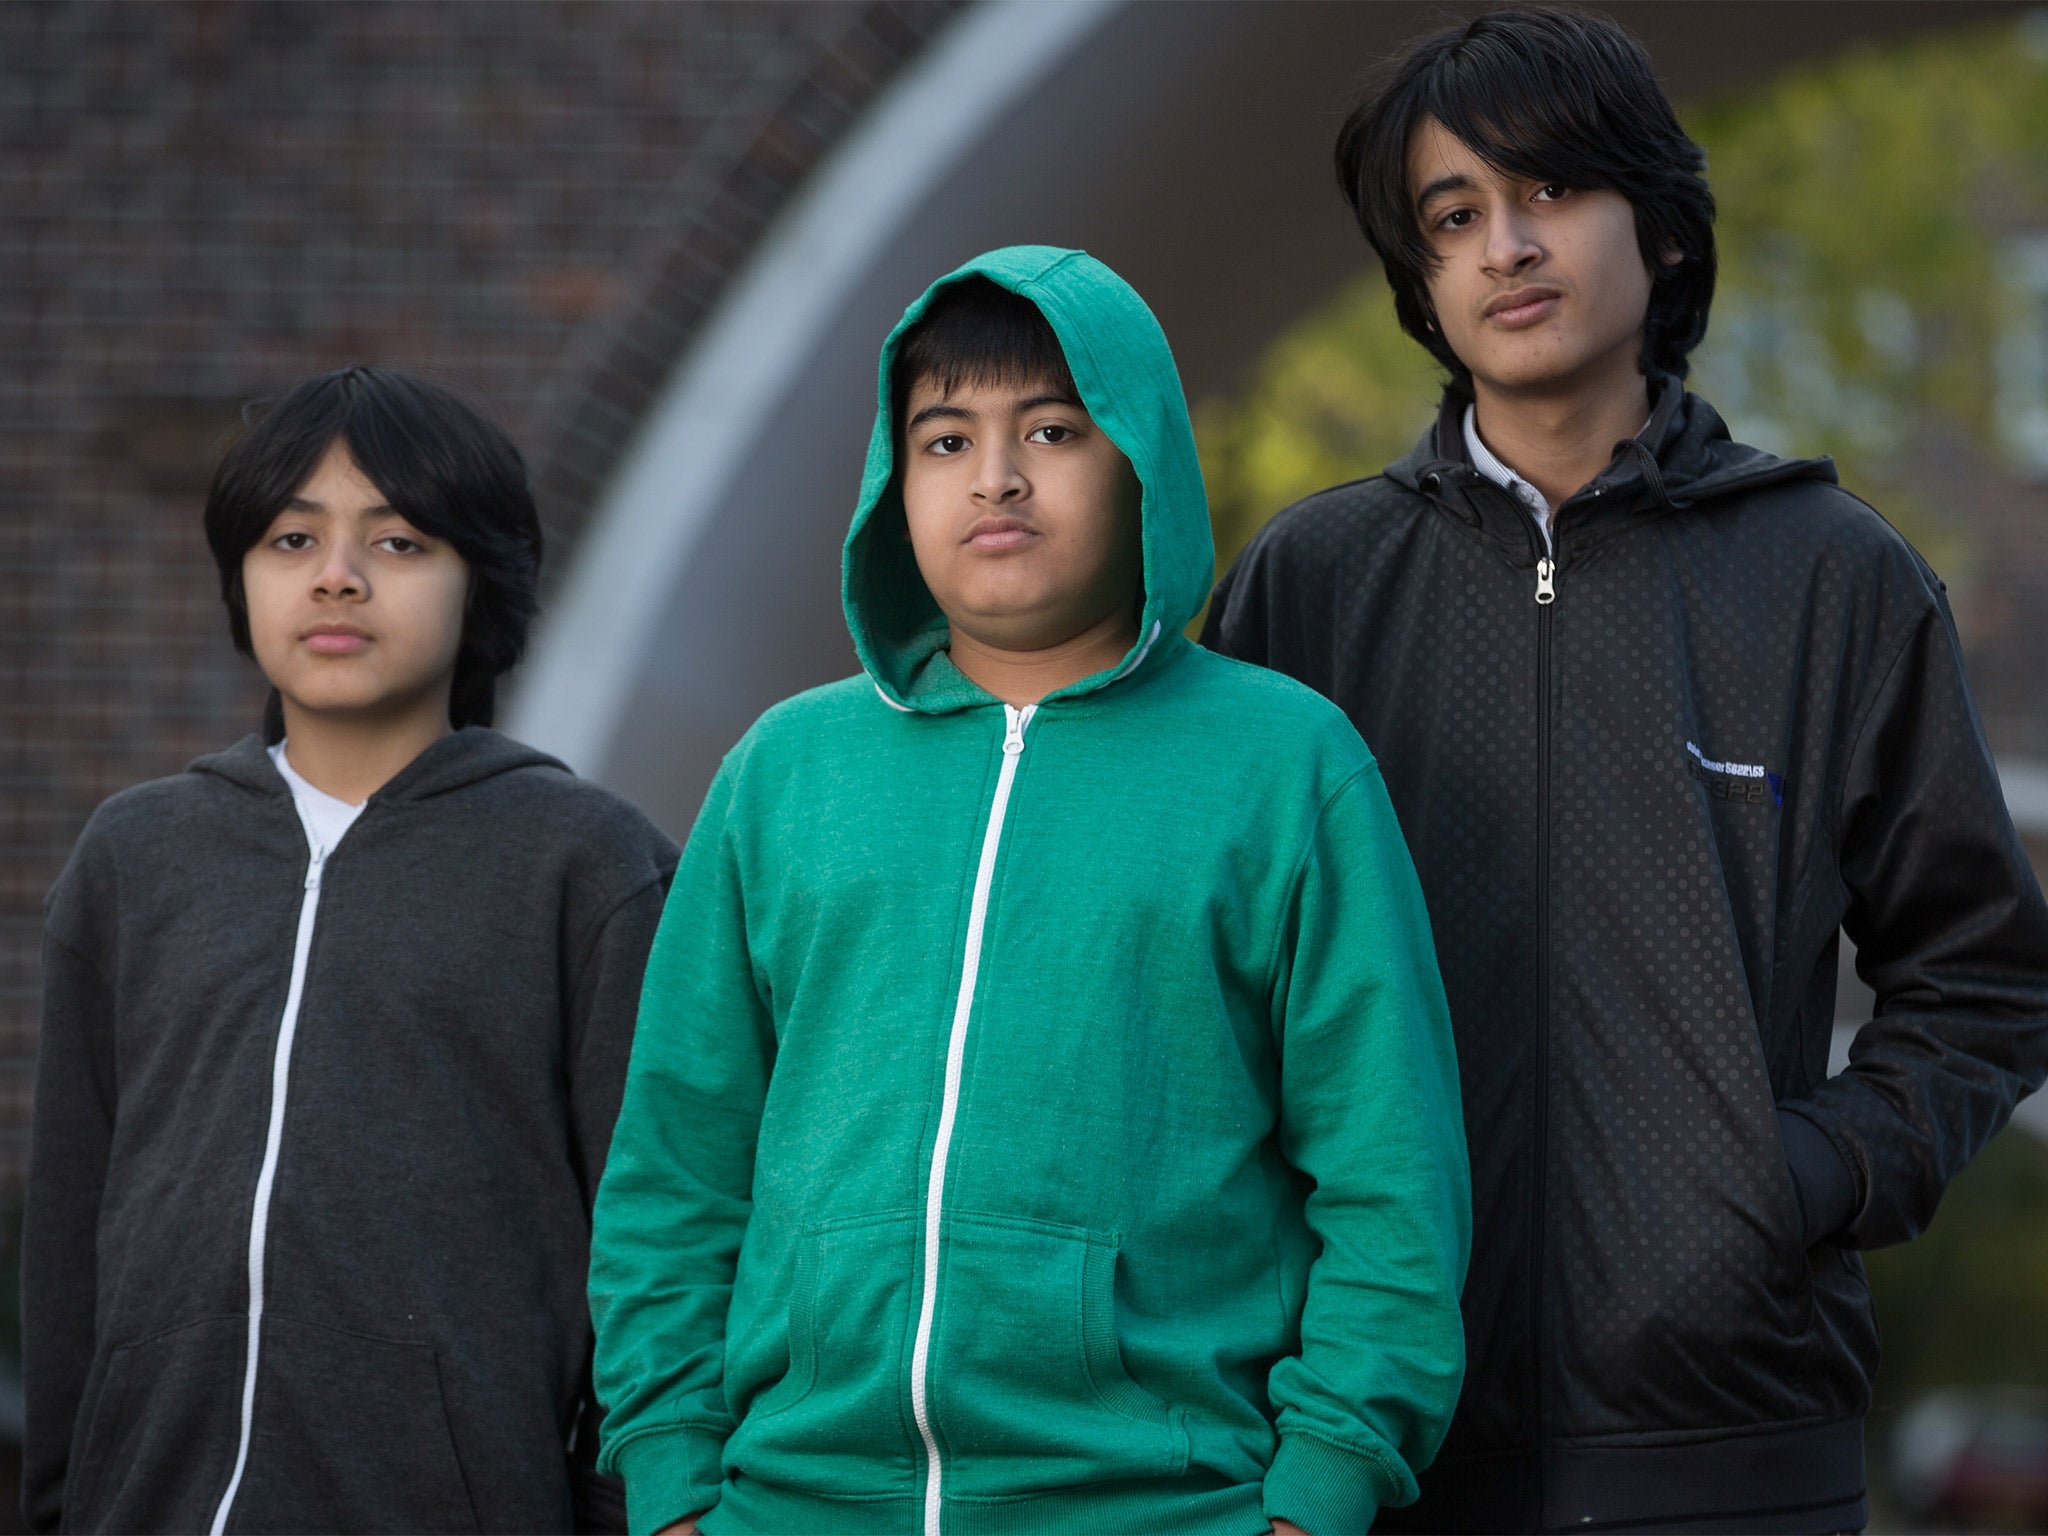 The children of Shaker Aamer, pictured in 2012